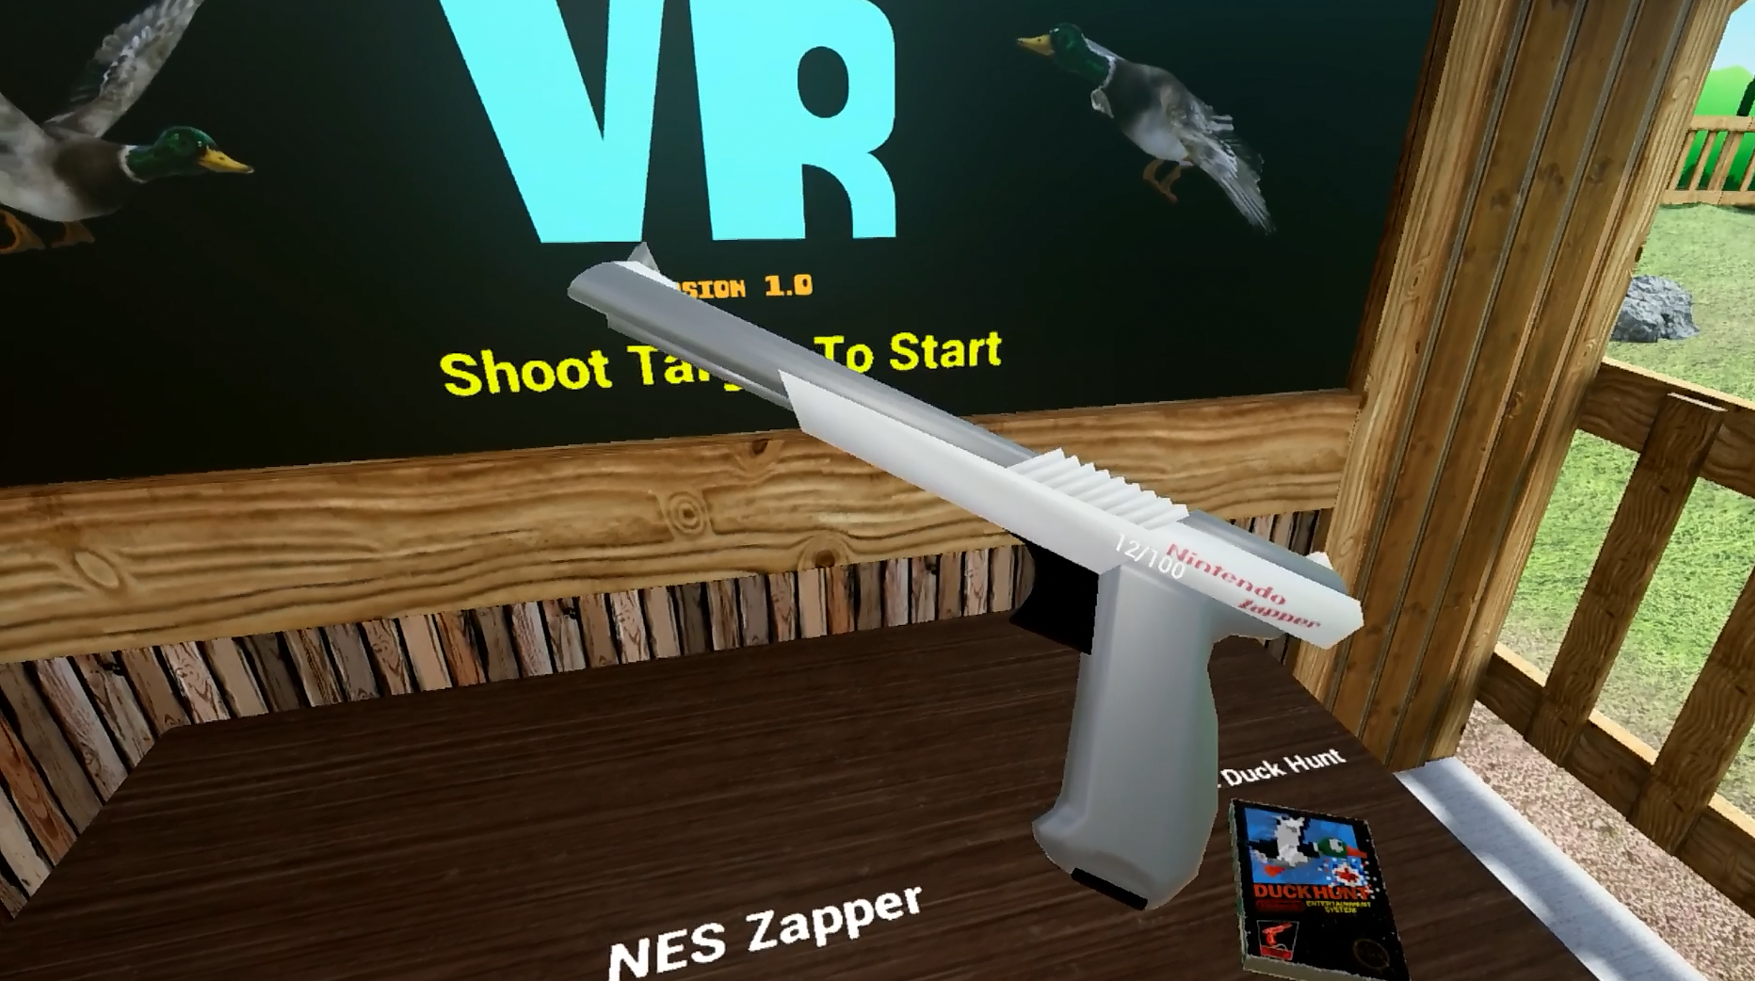 duck hunt vr free game full download pc